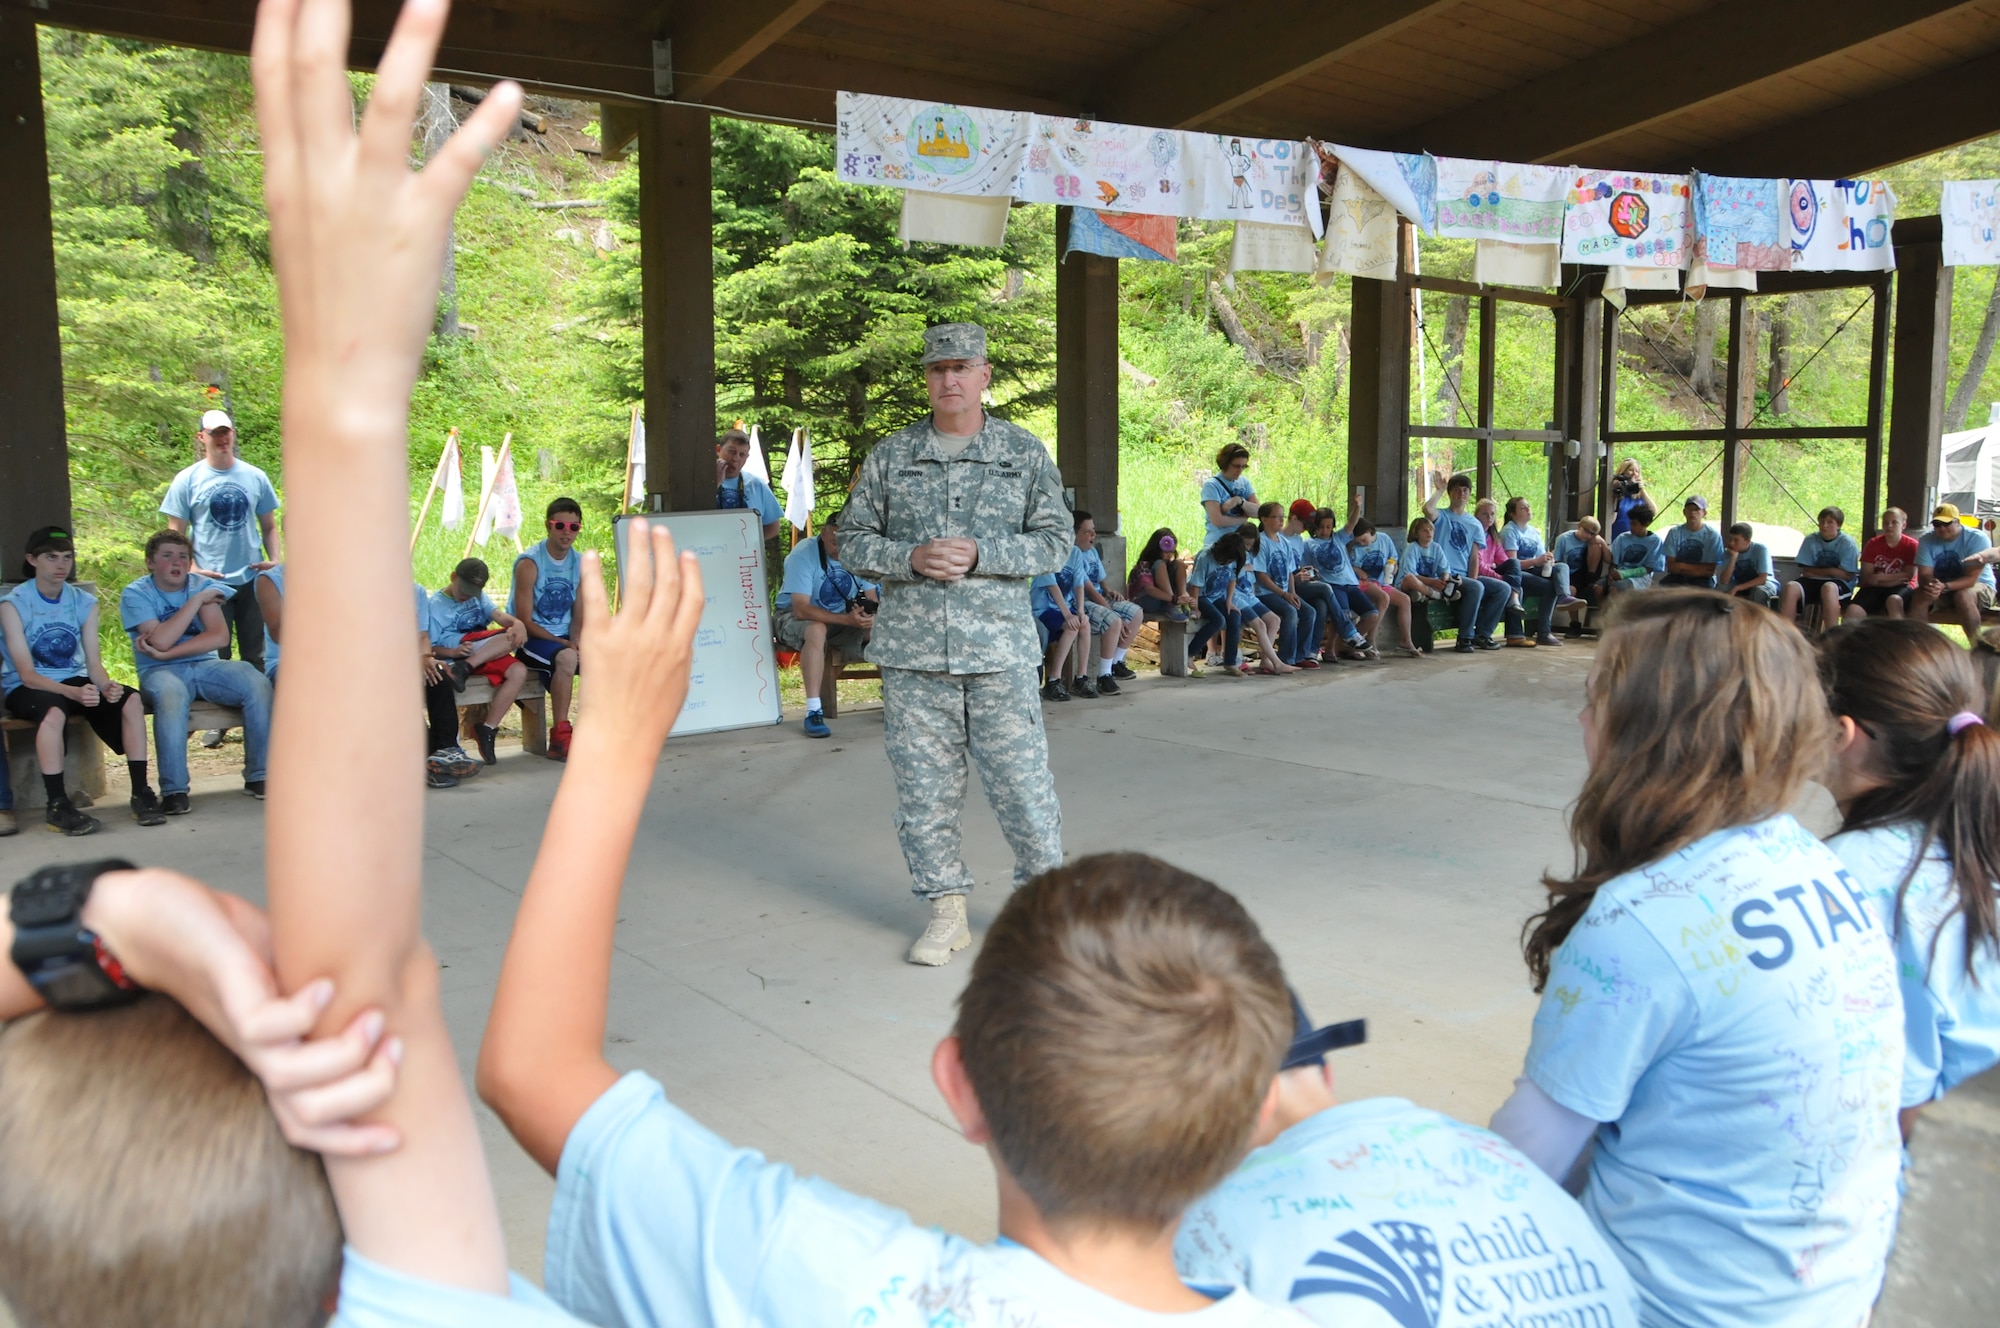 Campers ask questions of the Adjutant General of Montana, Maj. Gen. Matthew Quinn, during his visit to Camp Runnamucka, located near Monarch, Mont. June 27, 2013. The camp is put on by the Montana National Guard Child and Youth Program and serves children of National Guard members who have deployed. (U.S. Air National Guard photo by Senior Master Sgt. Eric Peterson)